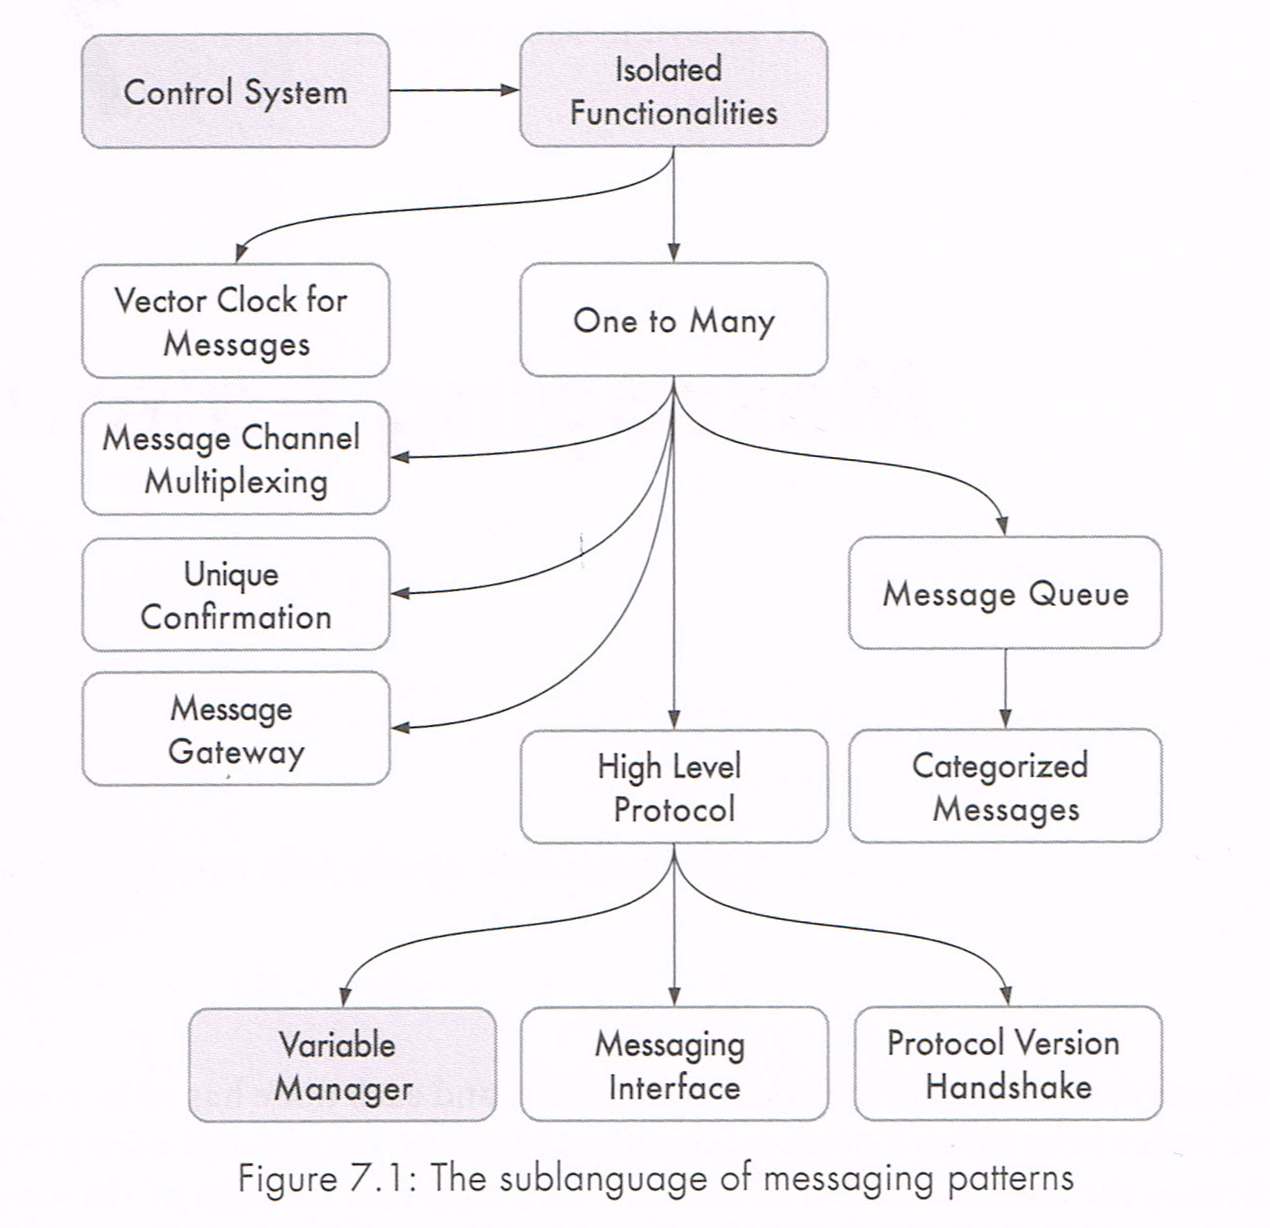 The sublanguage of messaging patterns